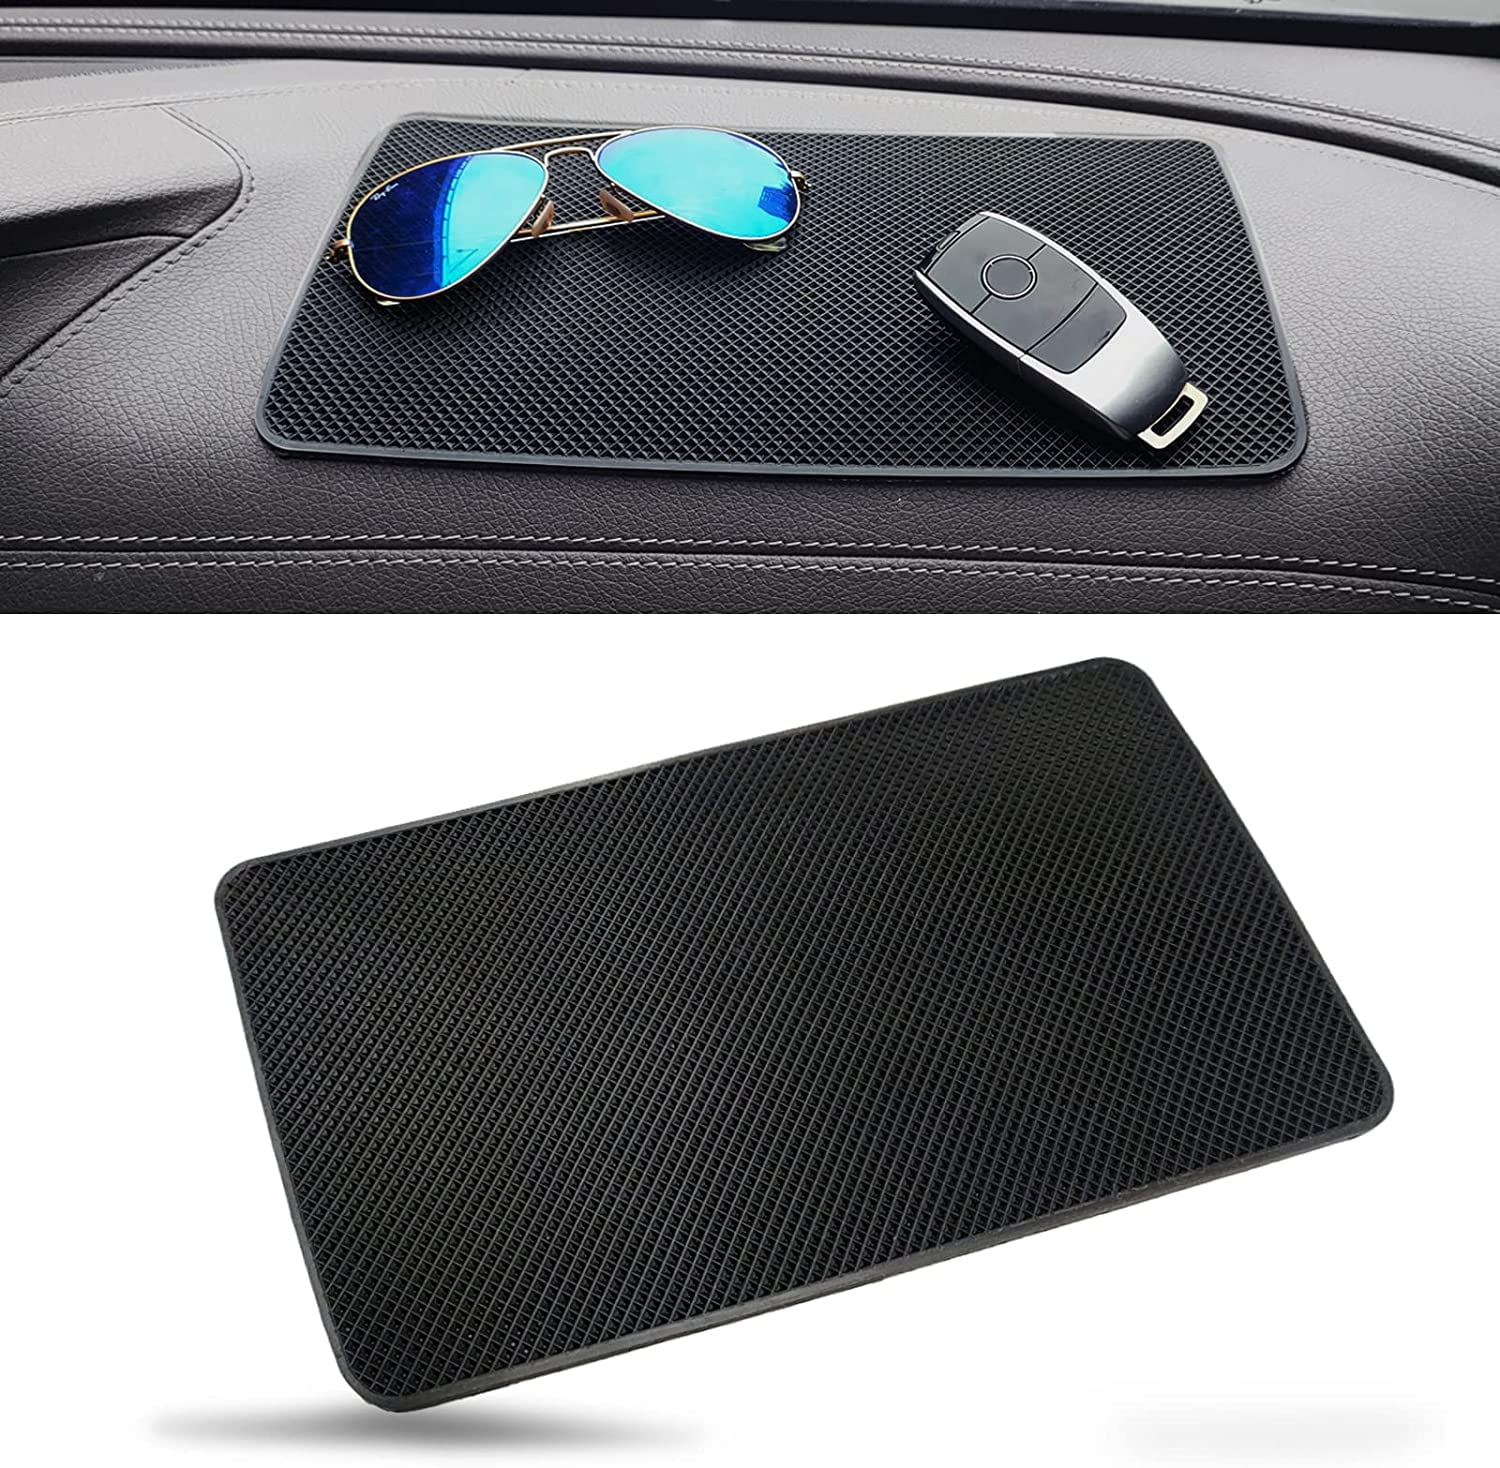 Car Dashboard Anti-Slip Rubber Pad, 10.6 x 5.9 Universal Non-Slip Car Magic  Dashboard Sticky Adhesive Mat for Cell Phones, Sunglasses, Keys, Coins and  More (Black/Grid) 